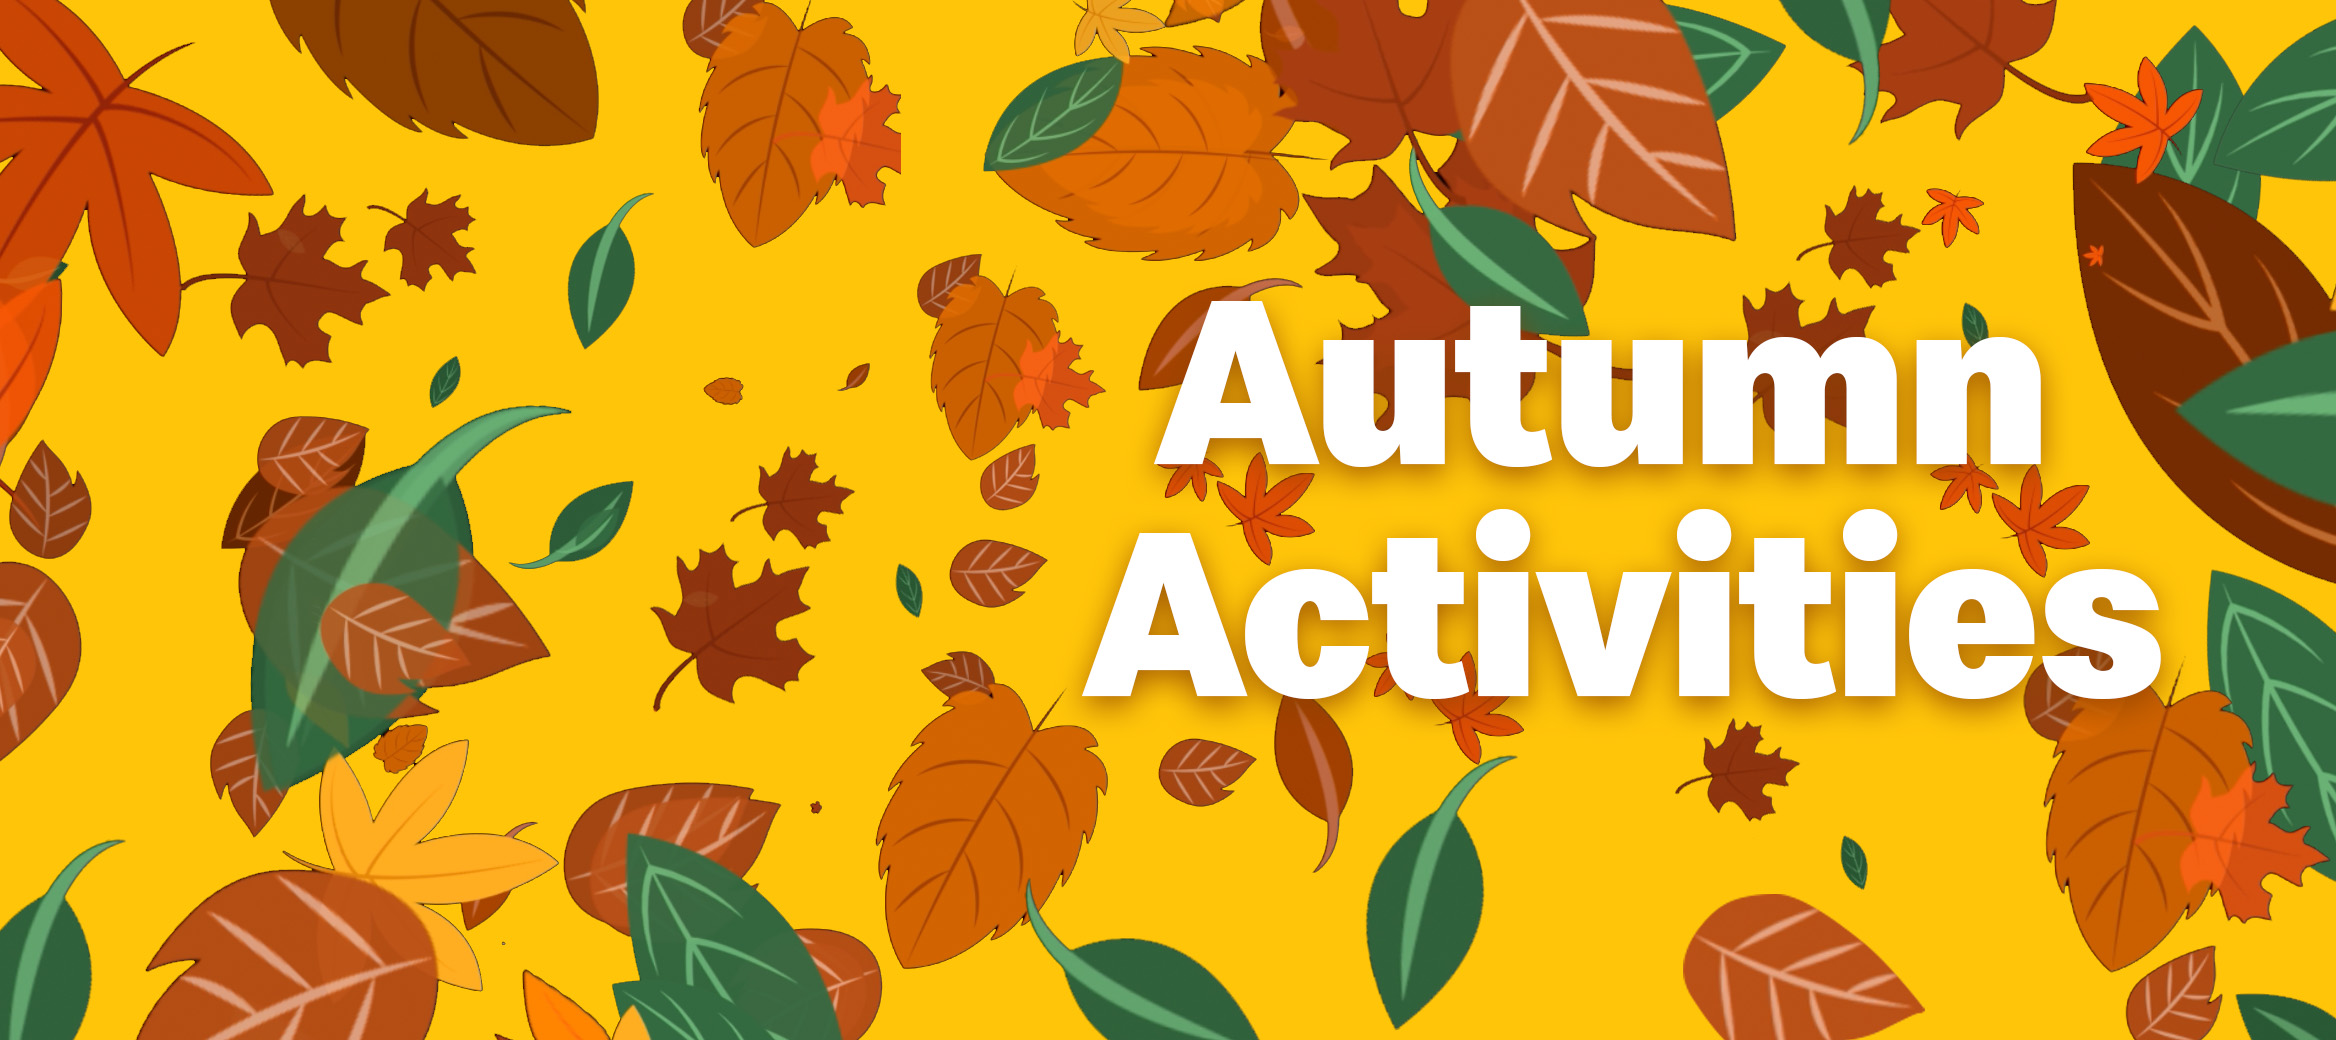 Different coloured leaves on a yellow background and a title that reads “Autumn Activities